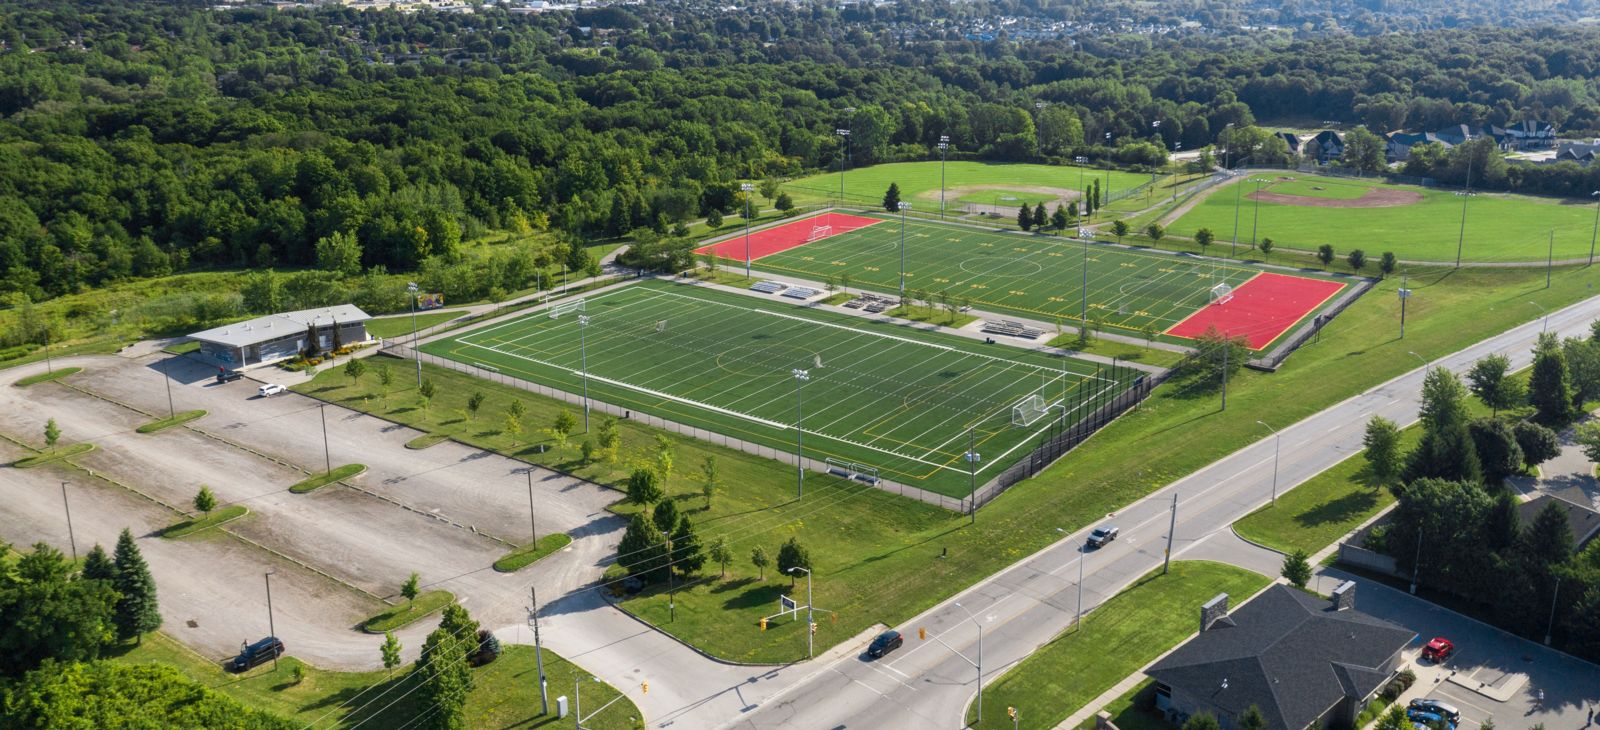 Aerial view of City Wide Sports Park - 2 soccer or football fields surrounded by trees and greenery